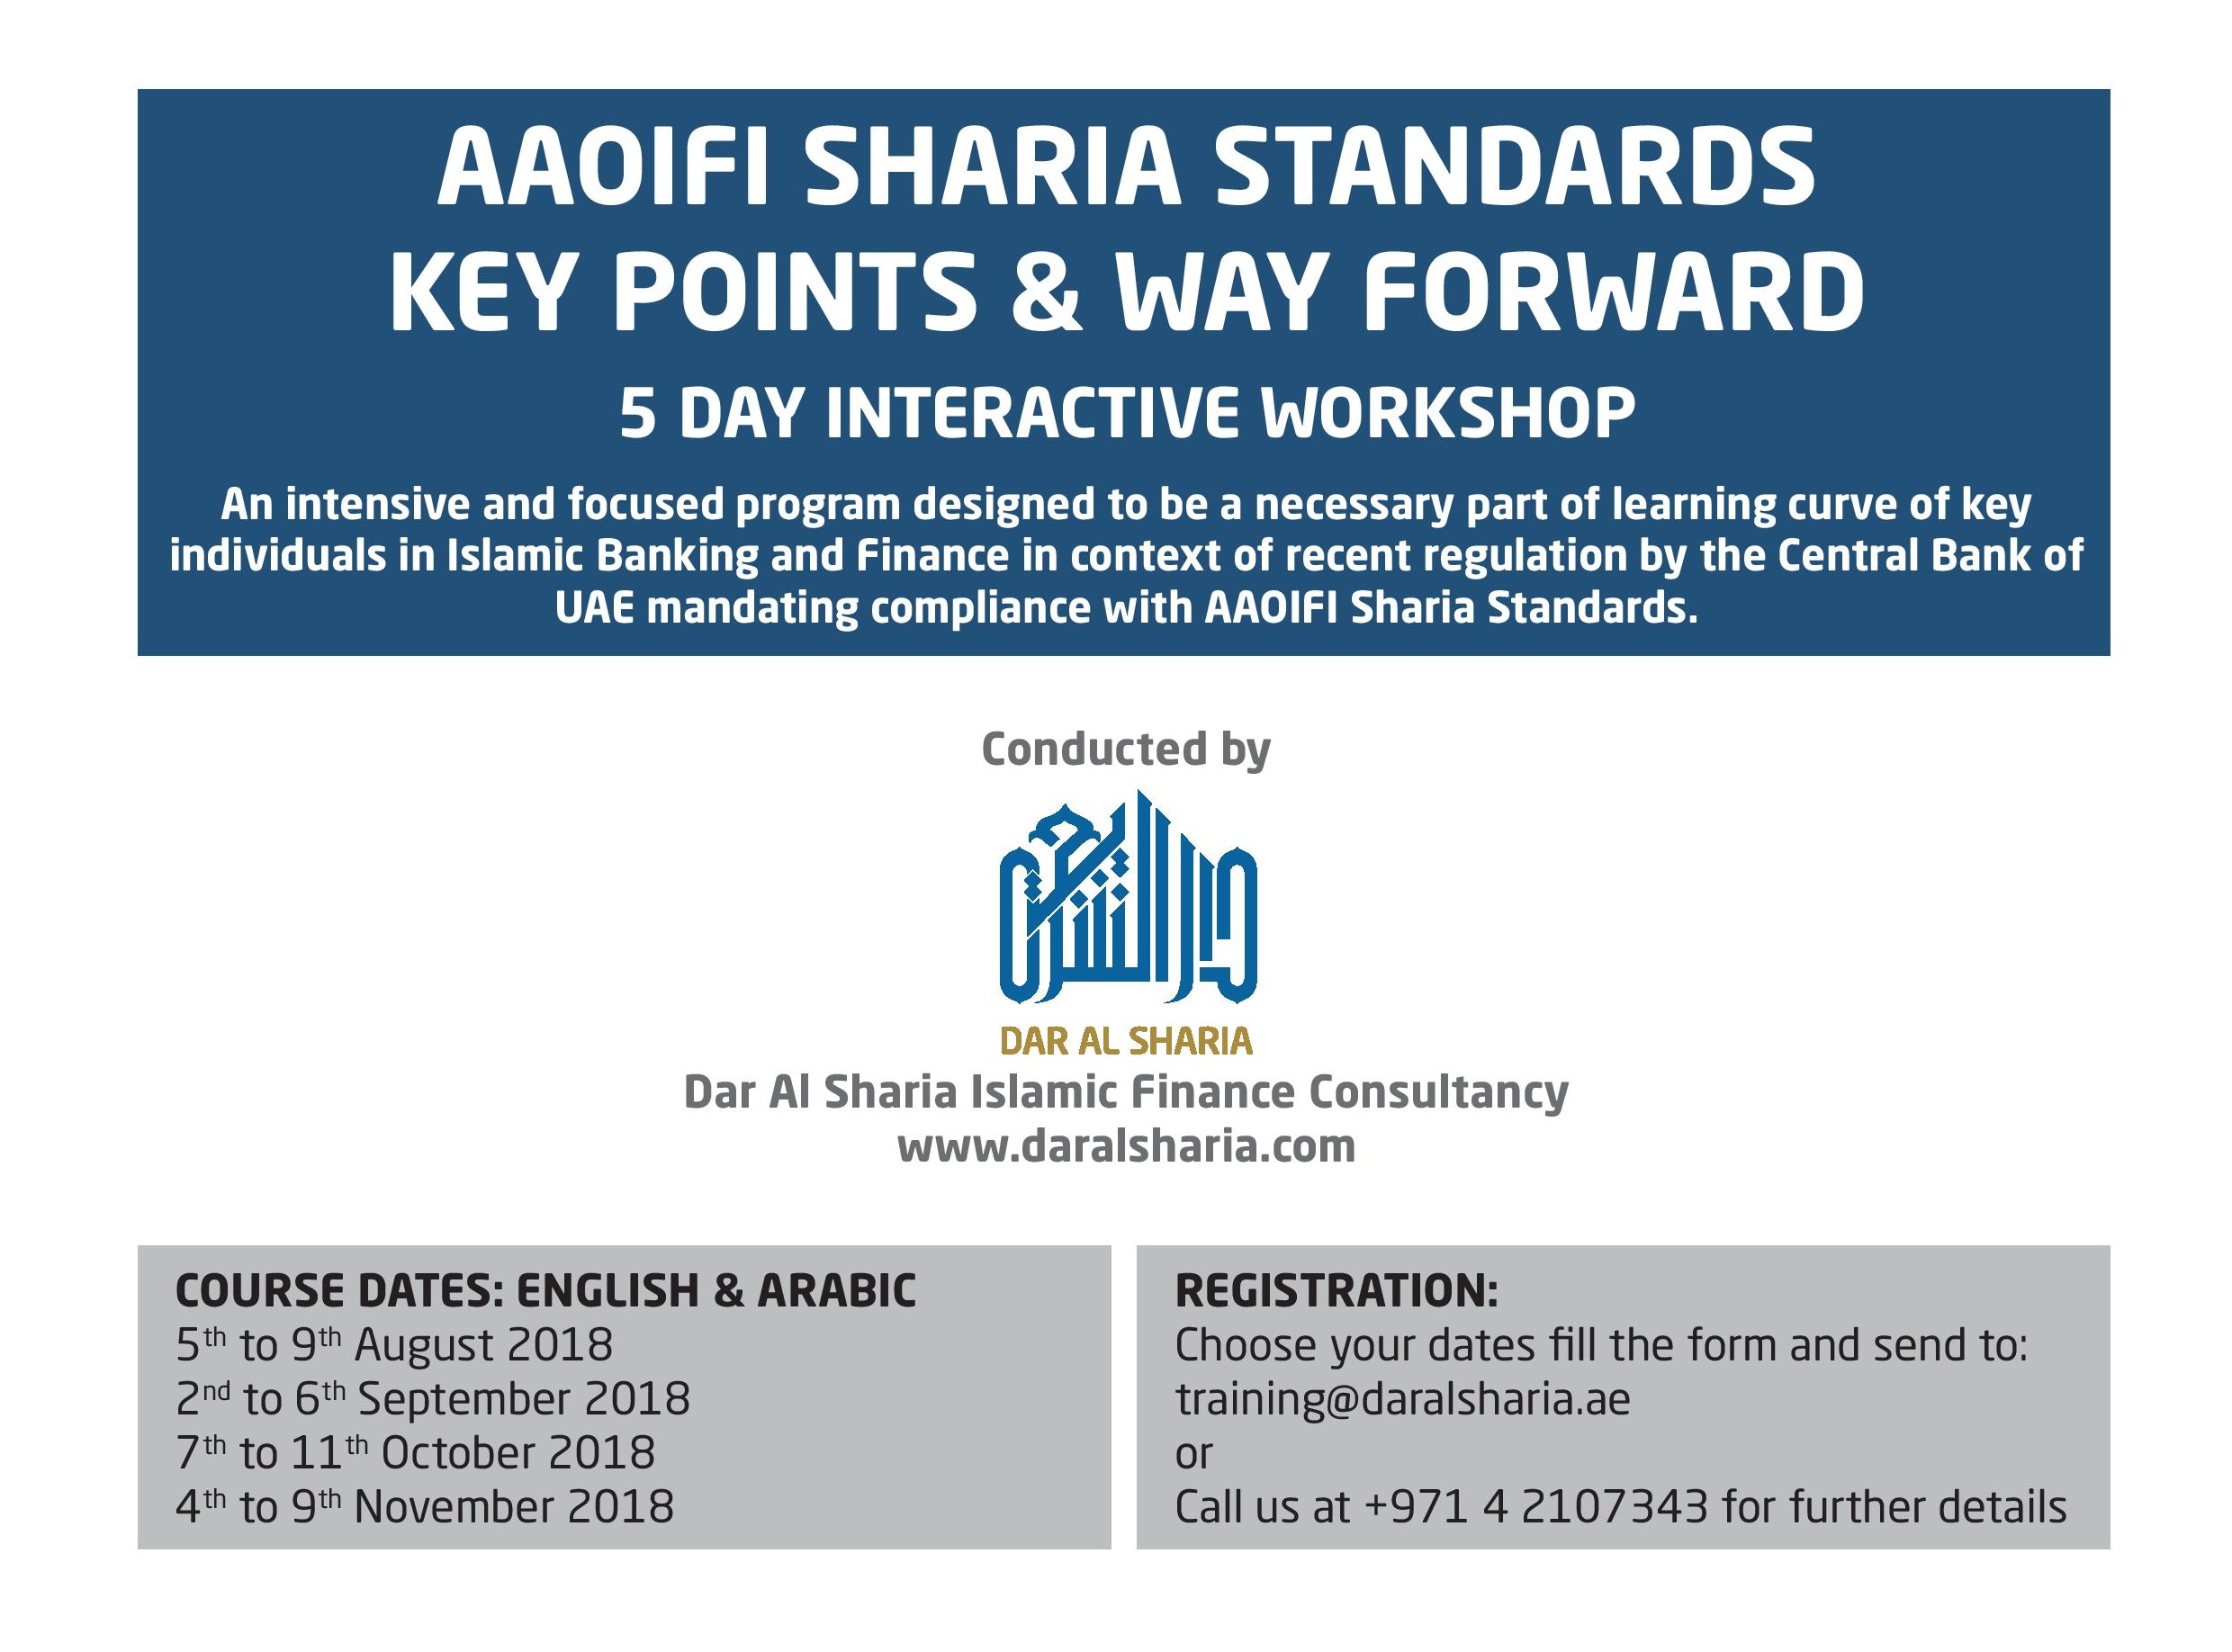 AAOIFI SHARIA STANDARDS KEY POINTS & WAY FORWARD - 5 DAY INTERACTIVE WORKSHOP